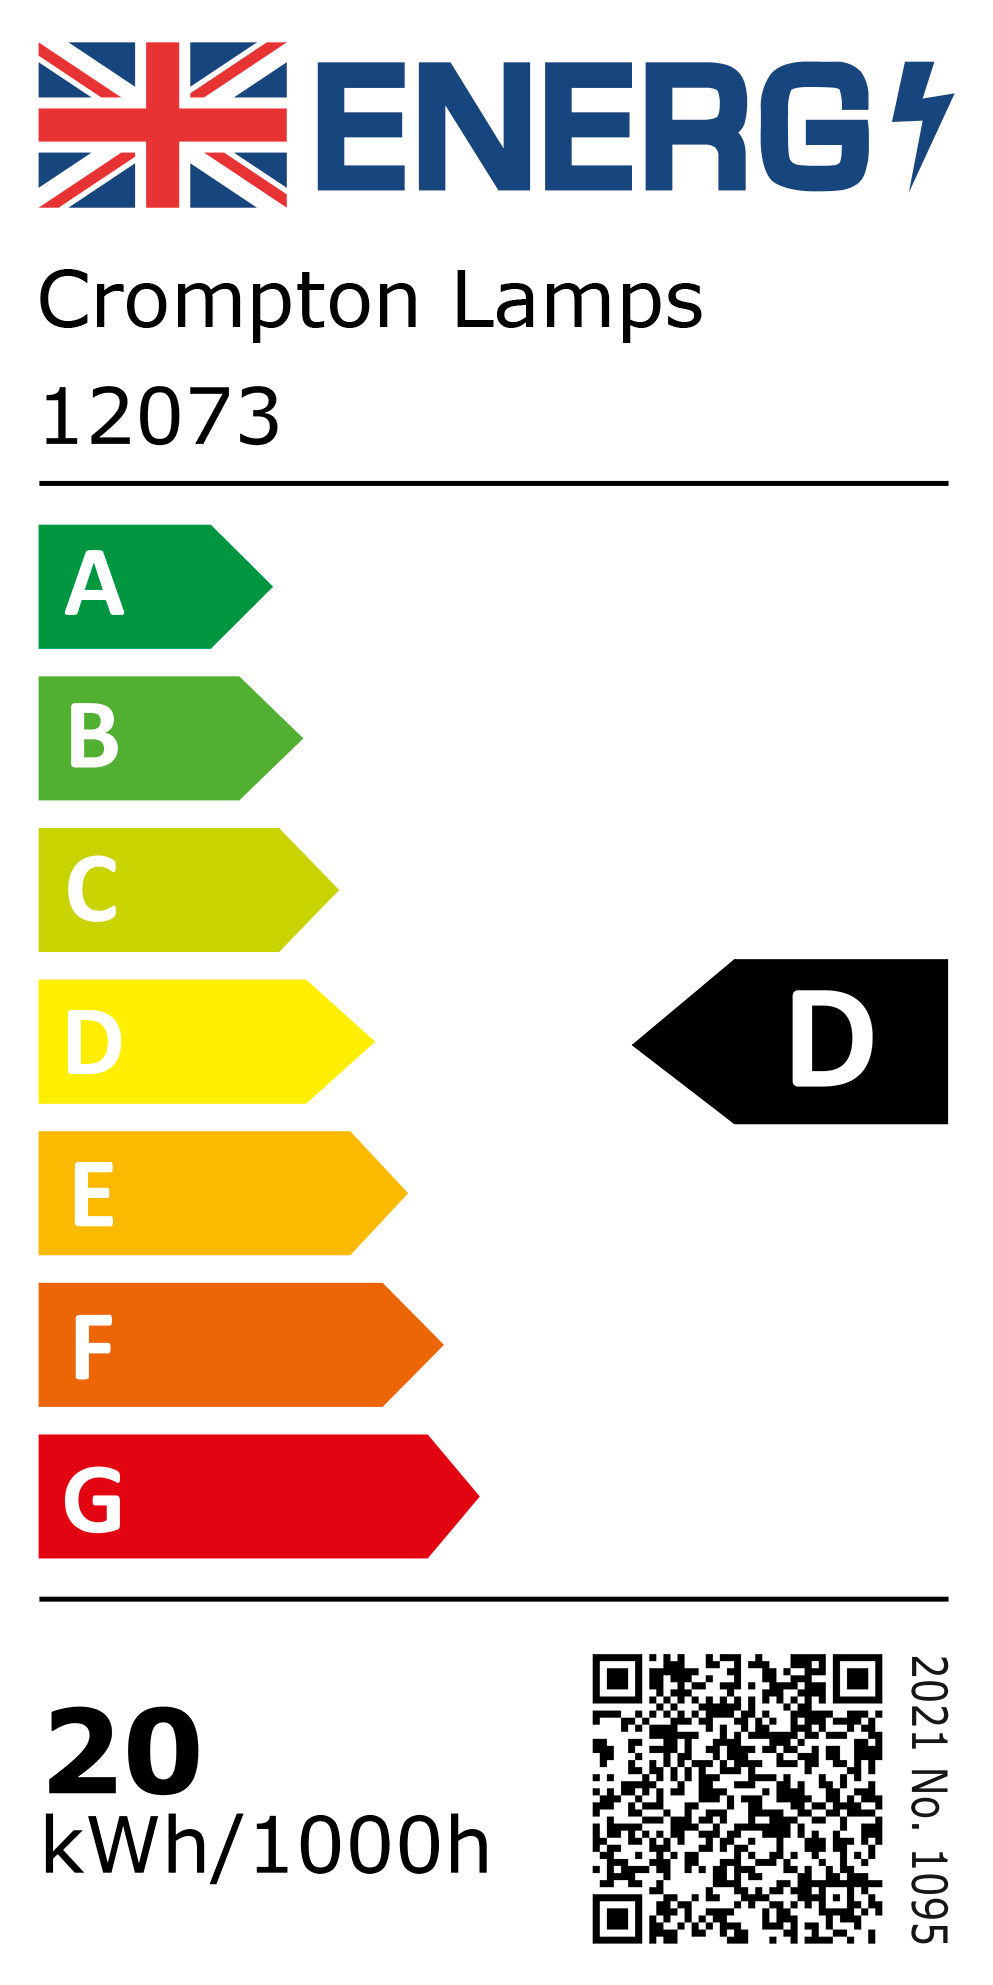 New 2021 Energy Rating Label: Stock Code 12073